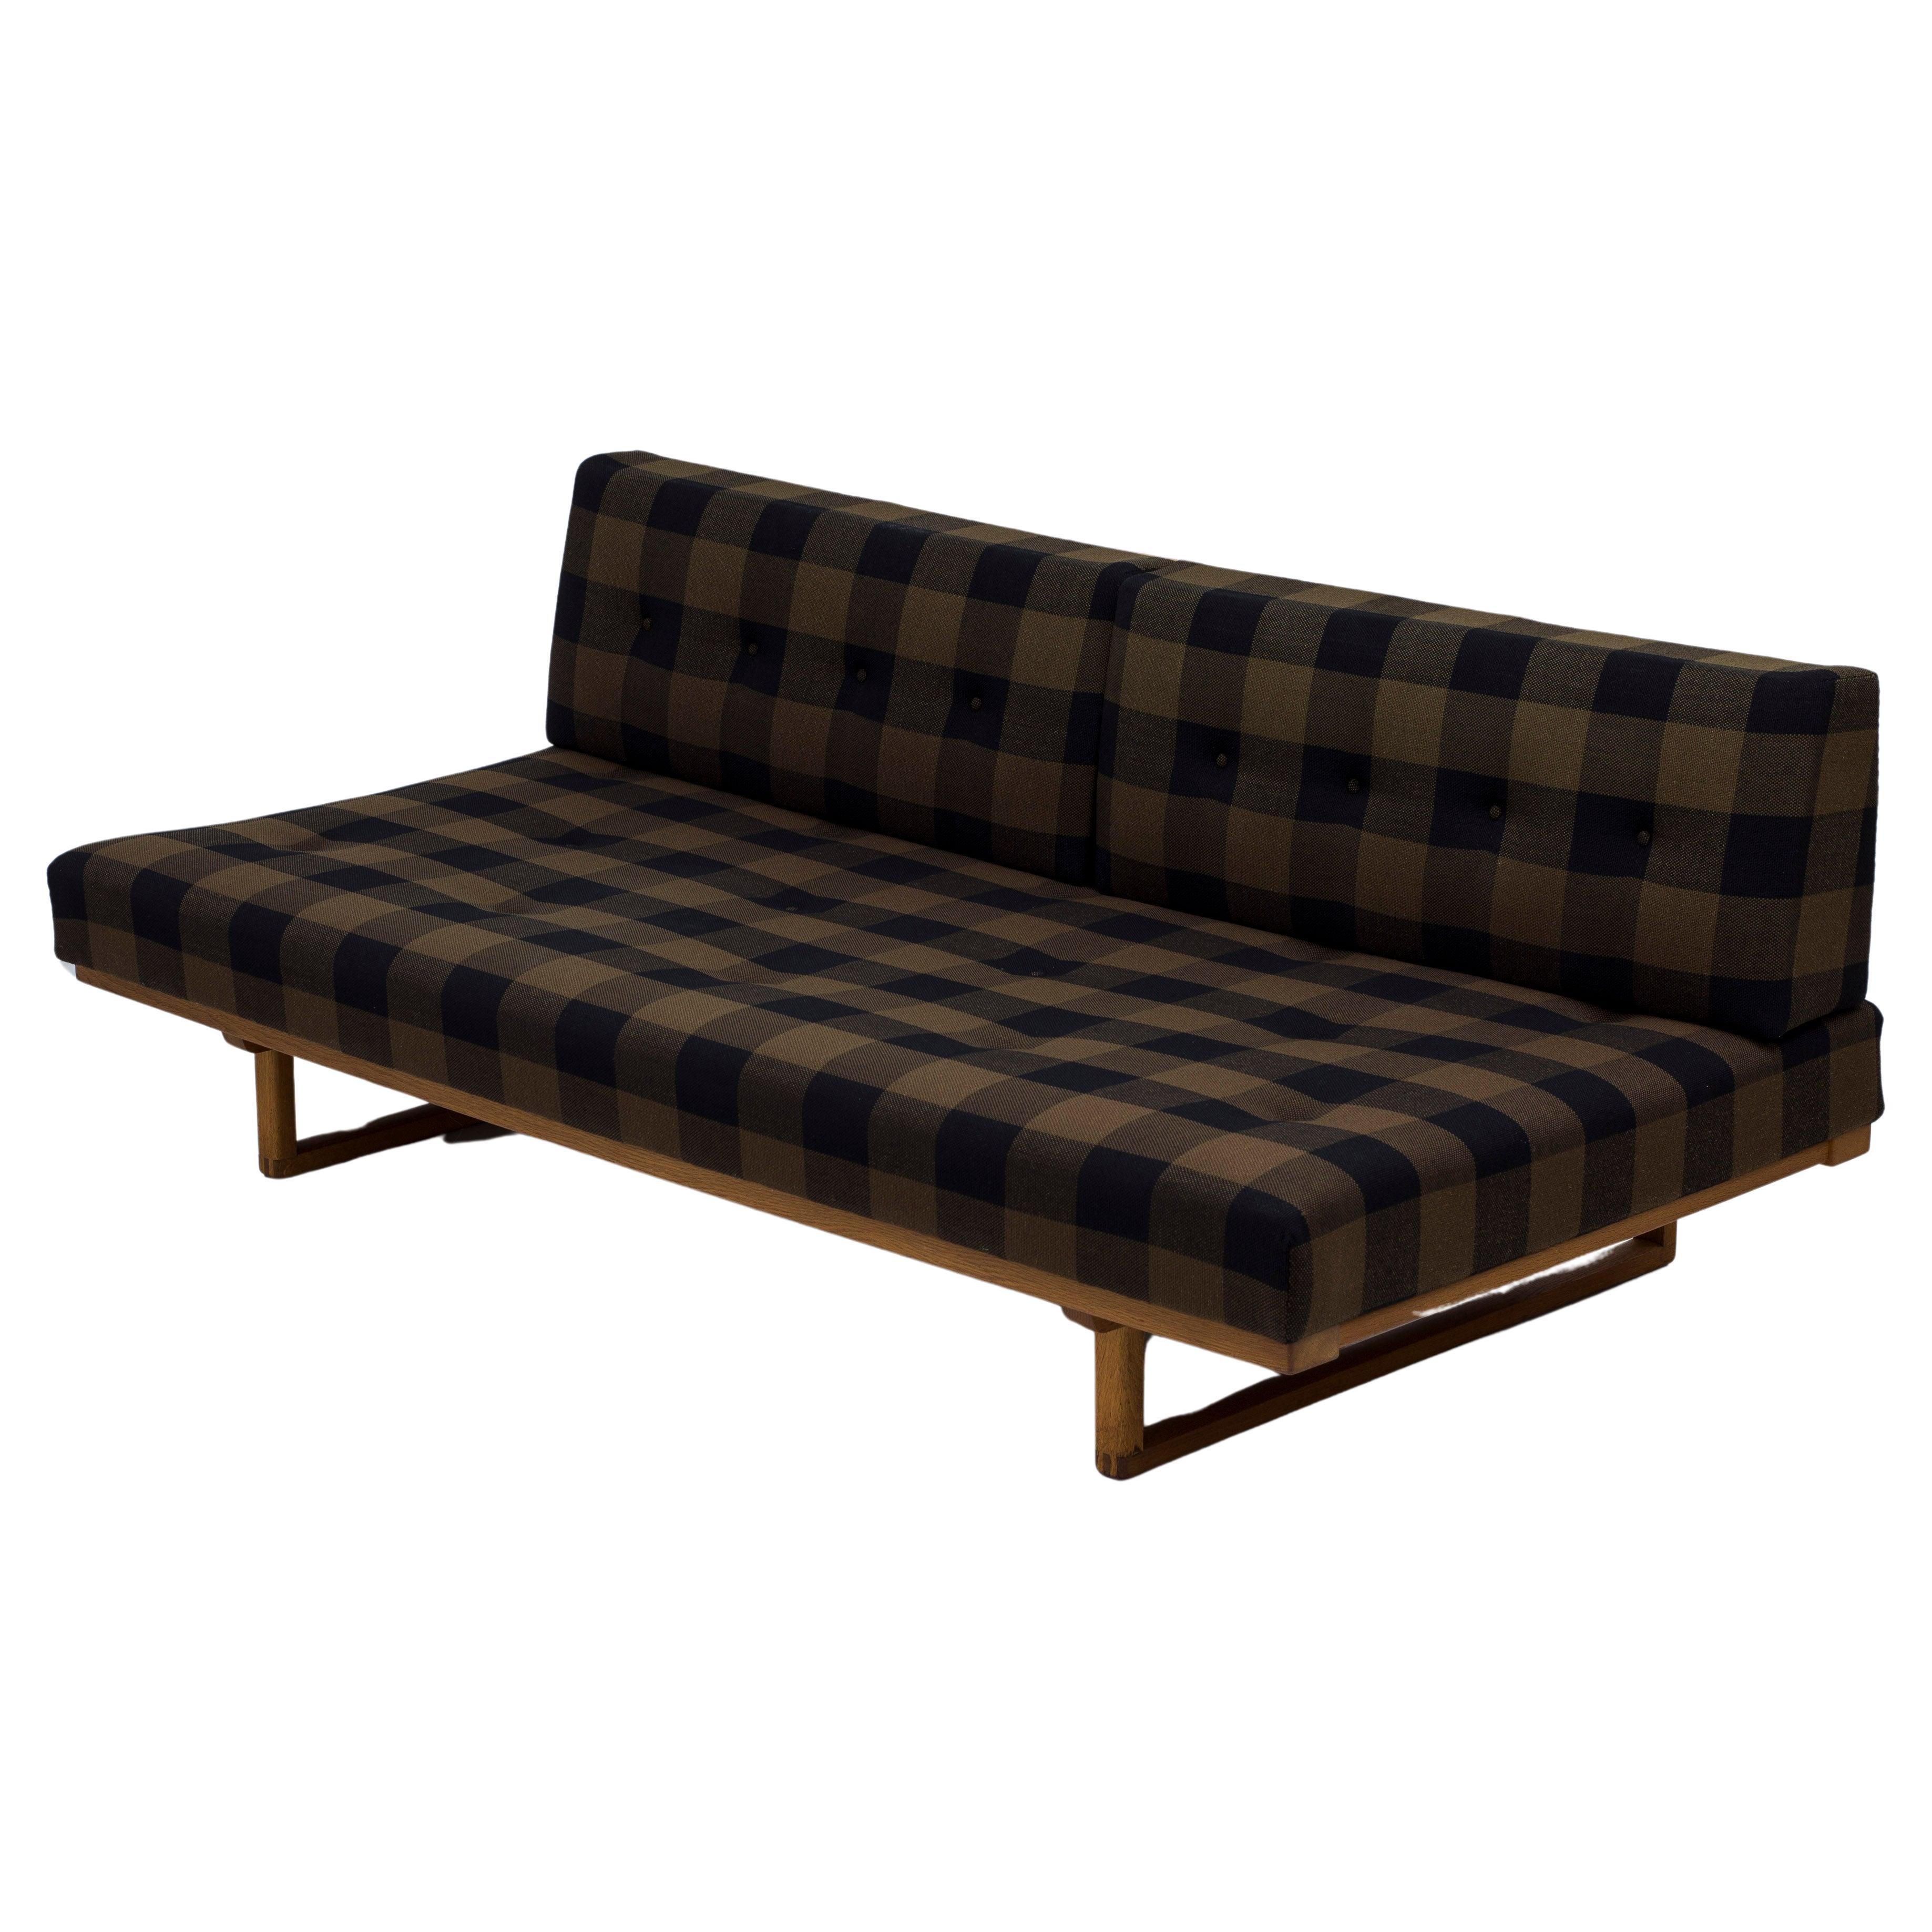 Sofa/daybed in oak and checkered original fabric by Børge Mogensen & Lis Ahlman